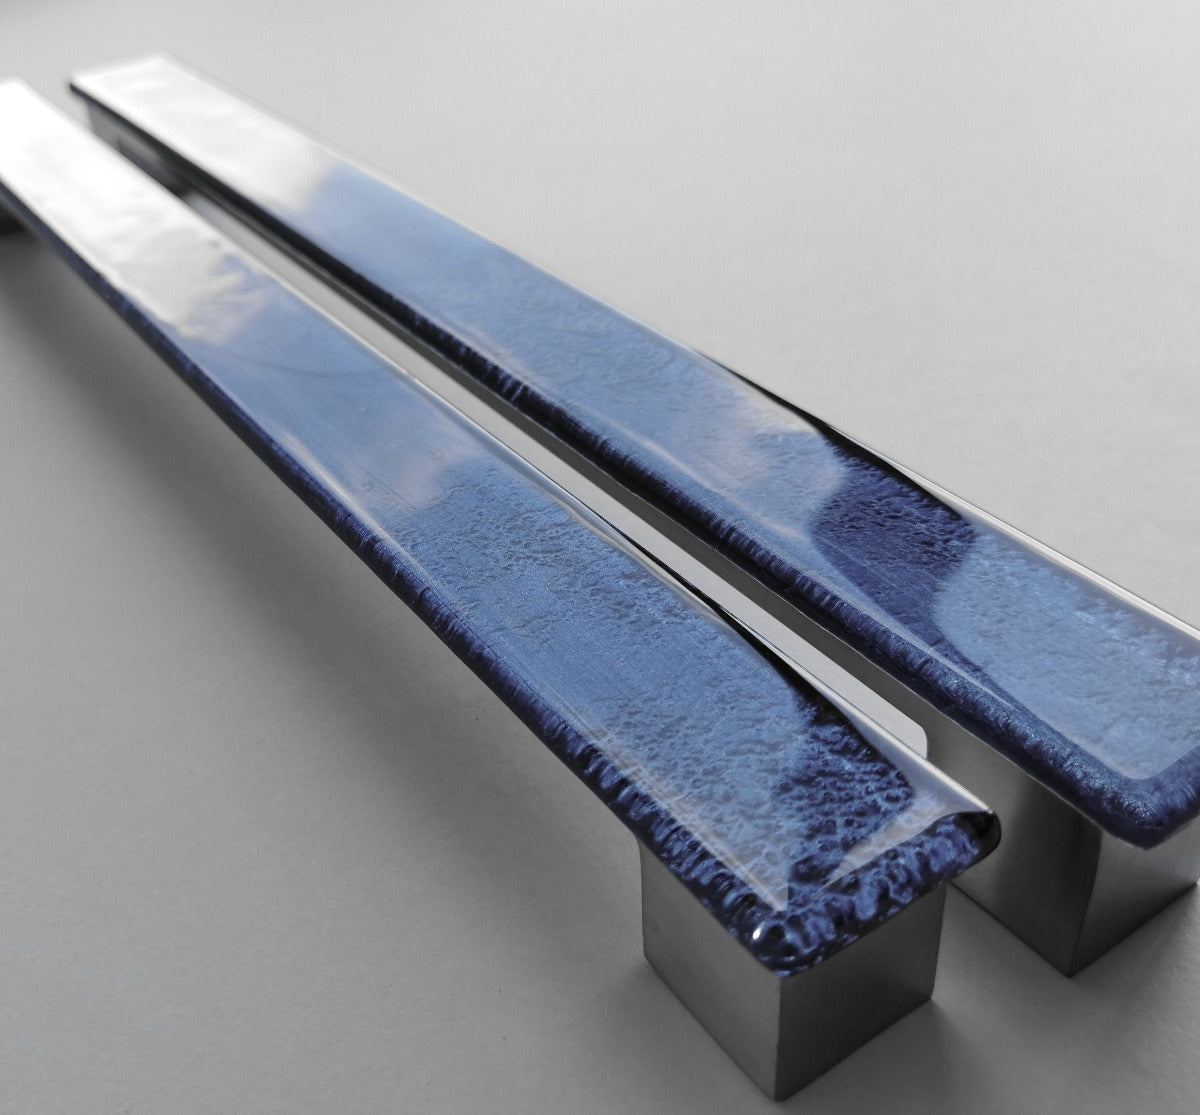 A Set of 2 Large Glass Pulls in Indigo Blue. Artistic Indigo Blue Furniture Glass Pull - 0039